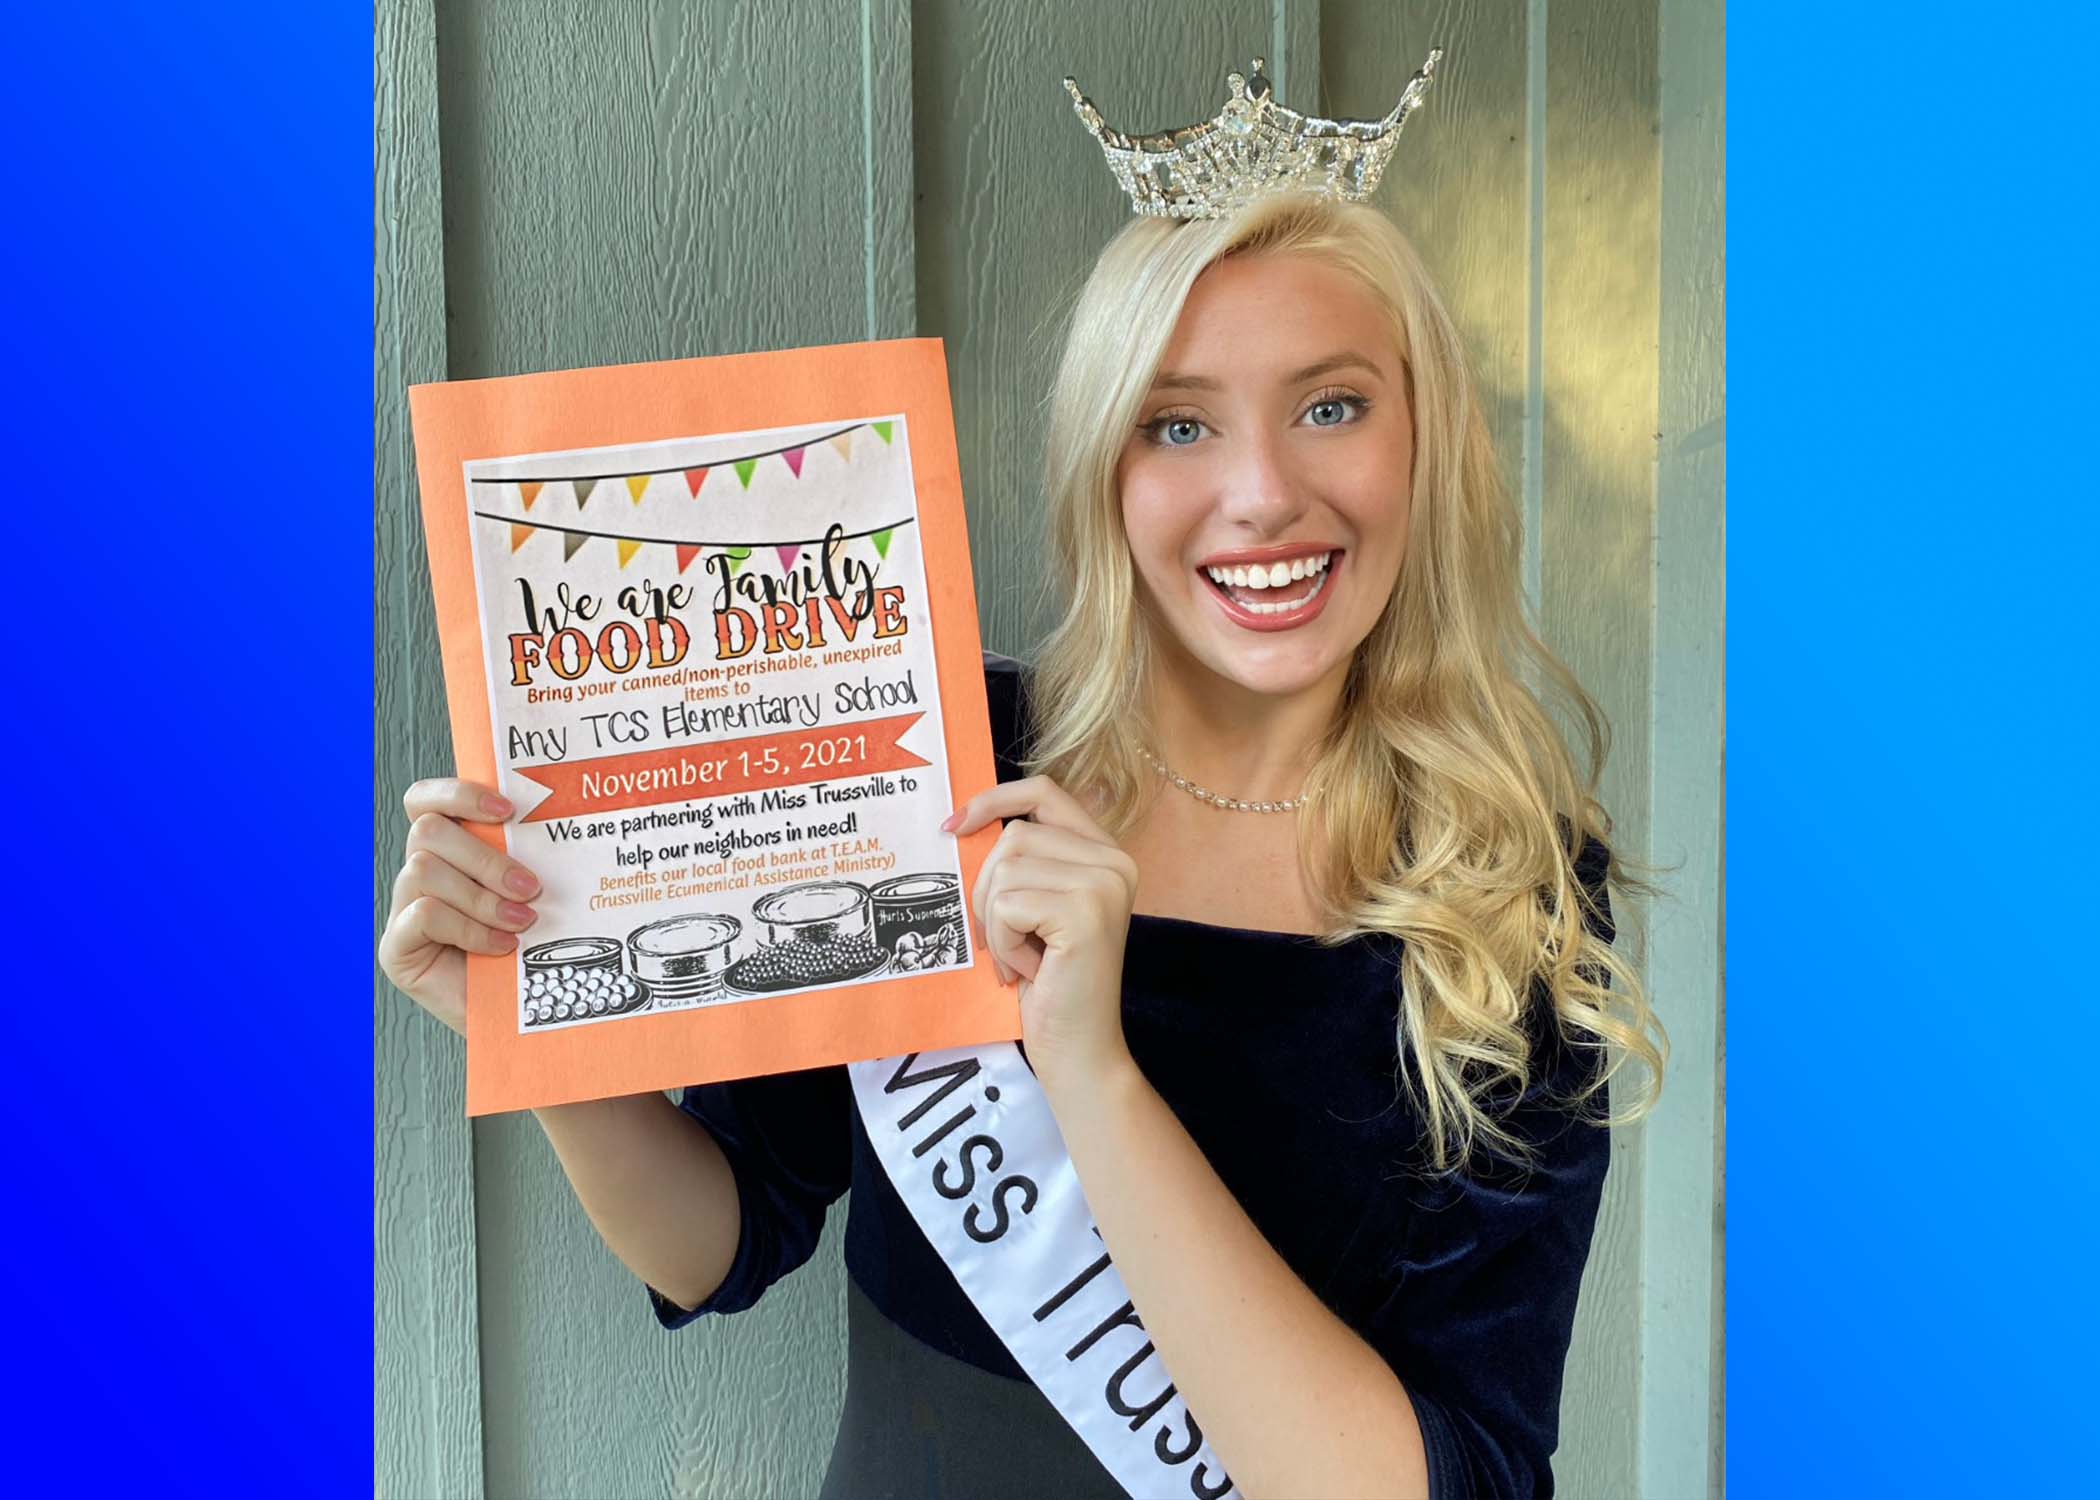 Miss Trussville joins with local food drive to help needy families